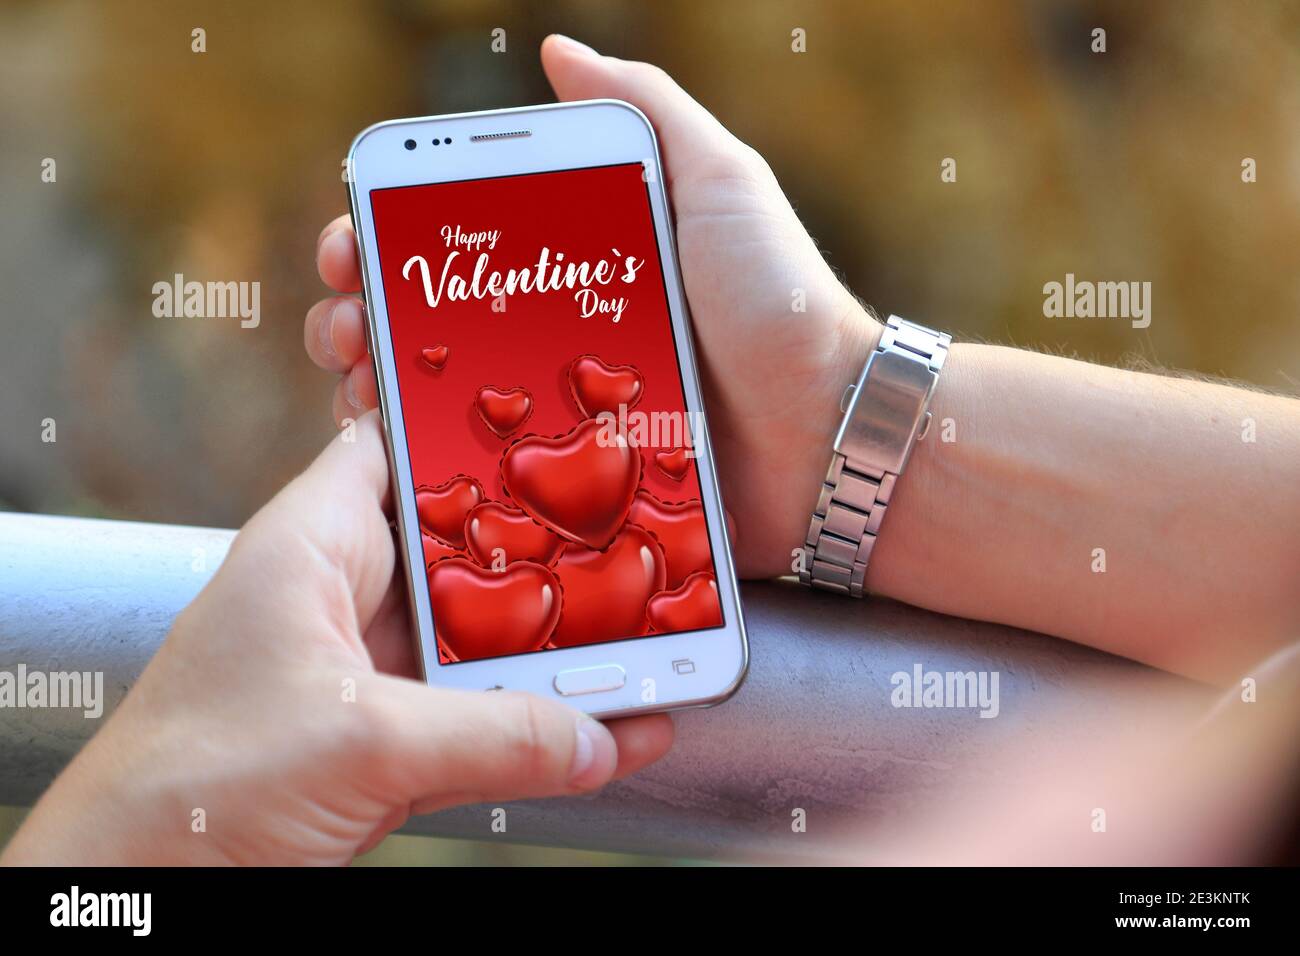 Valentines Day digital online card in the screen of mobile phone. Stock Photo